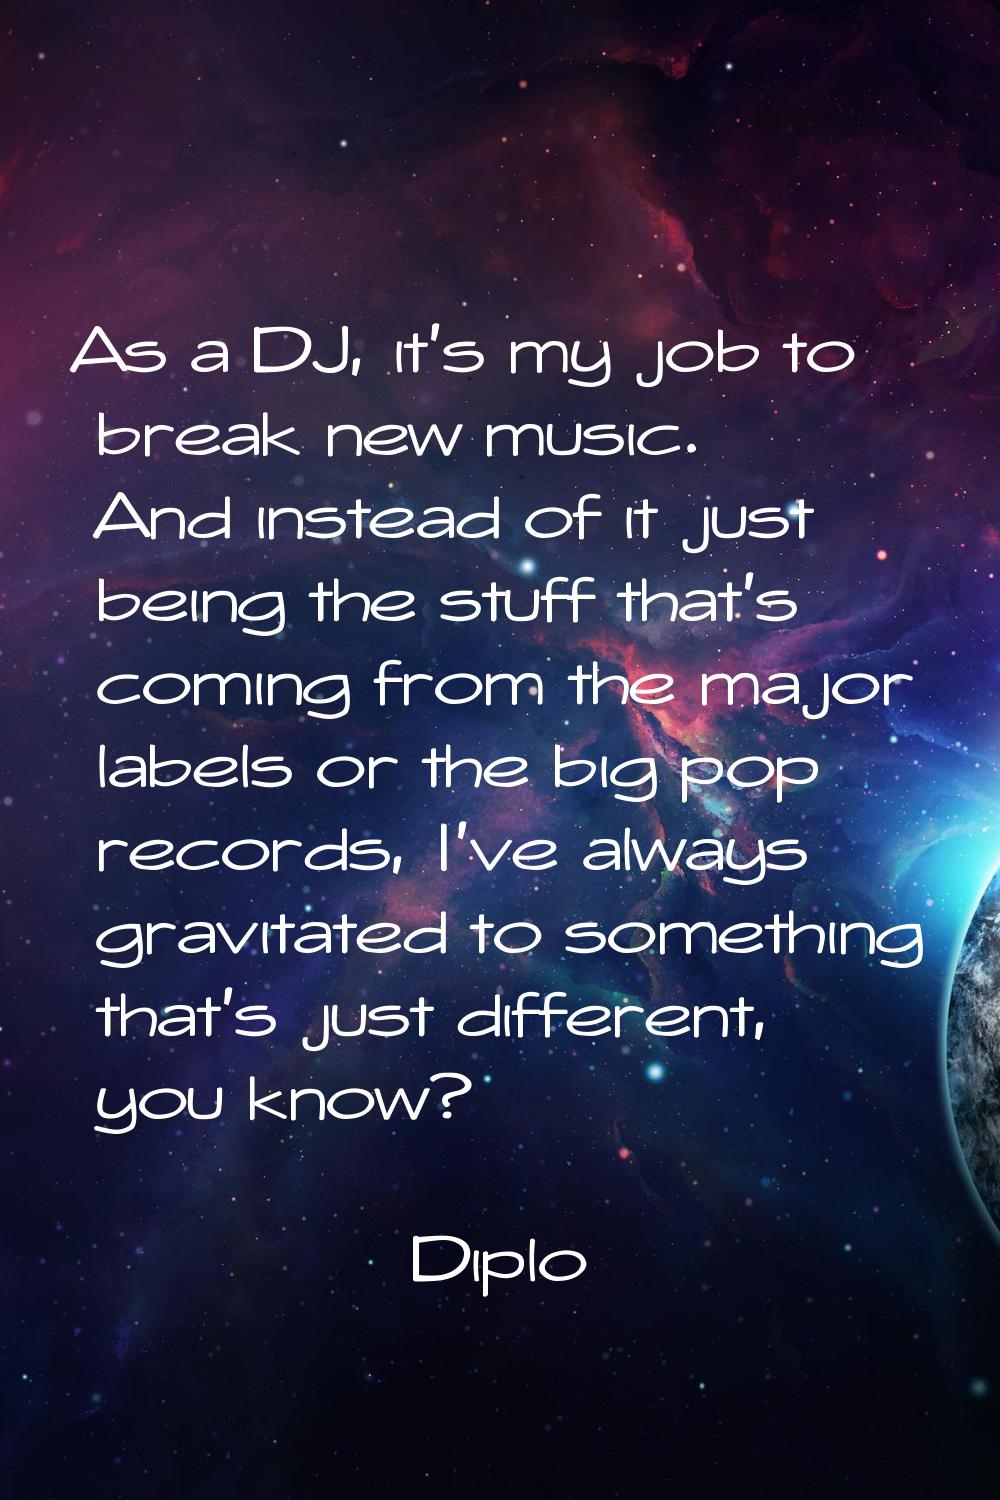 As a DJ, it's my job to break new music. And instead of it just being the stuff that's coming from 